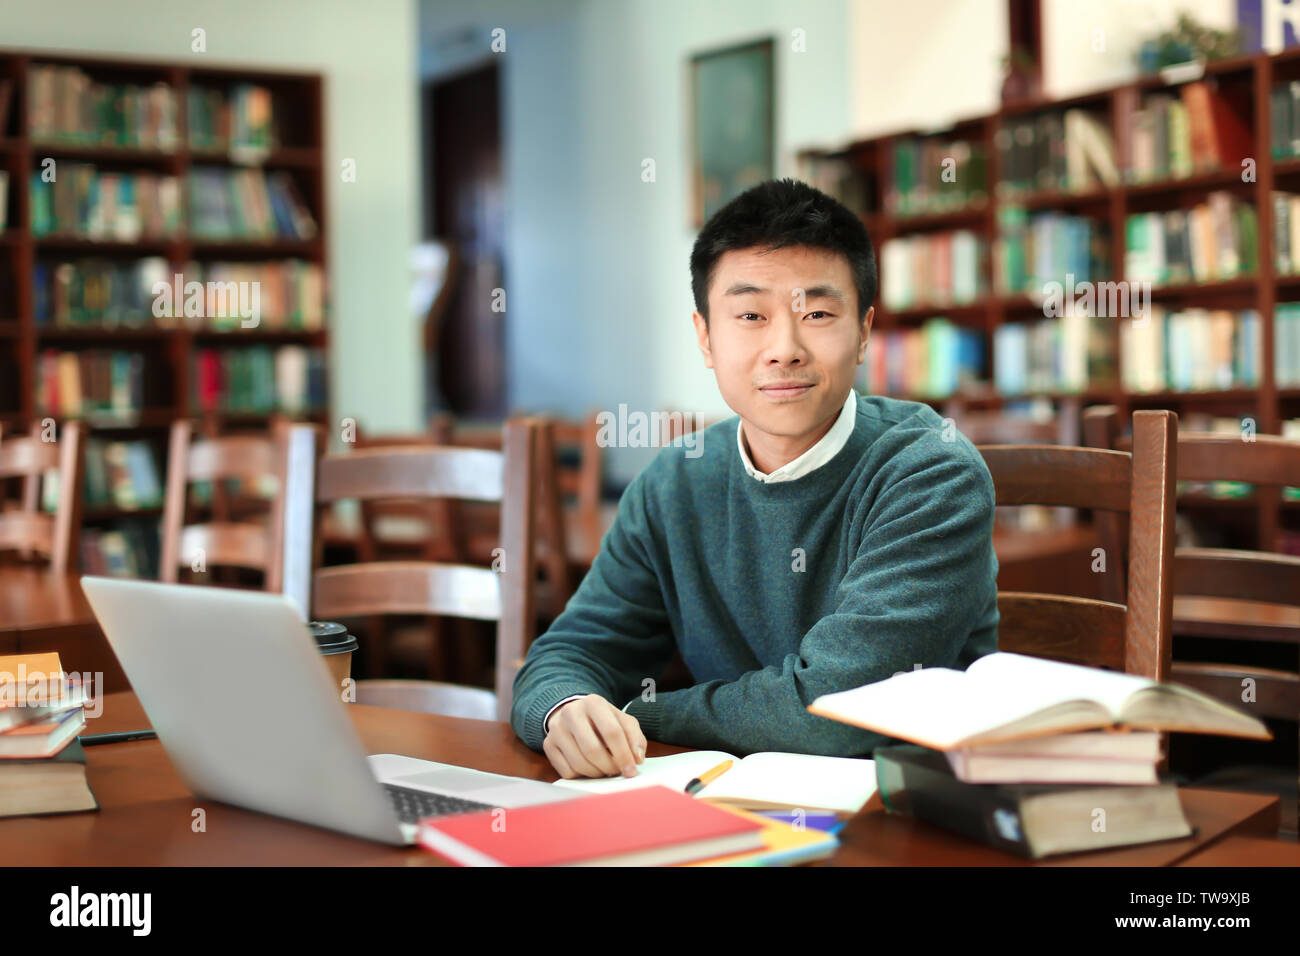 Asian student with laptop studying in library Banque D'Images